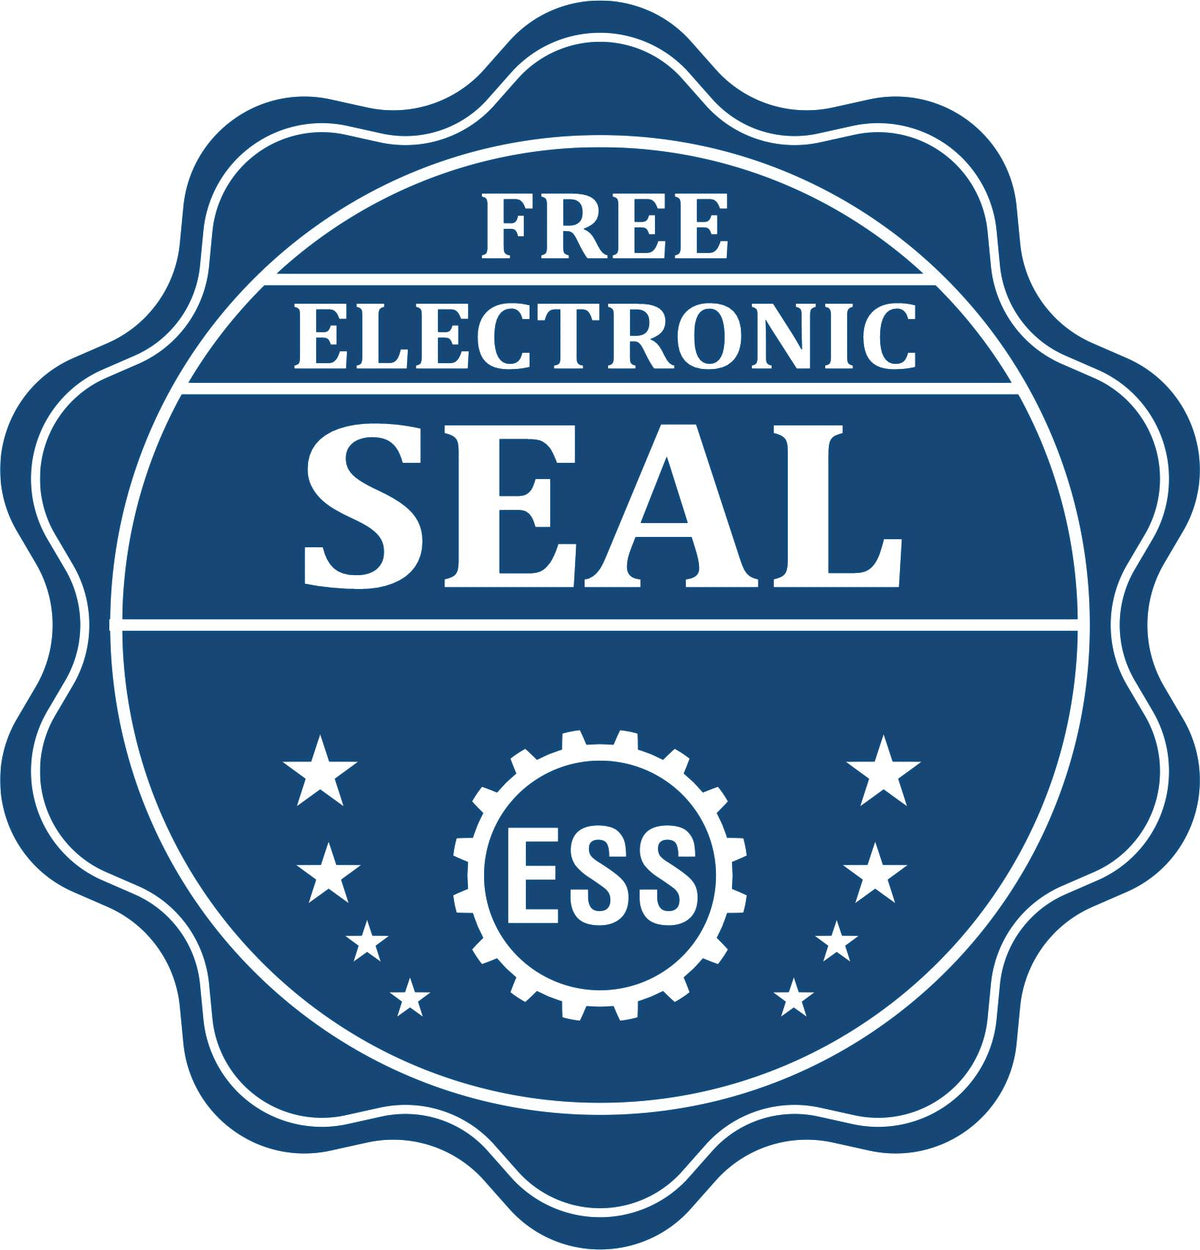 A badge showing a free electronic seal for the Premium MaxLight Pre-Inked Arizona Engineering Stamp with stars and the ESS gear on the emblem.